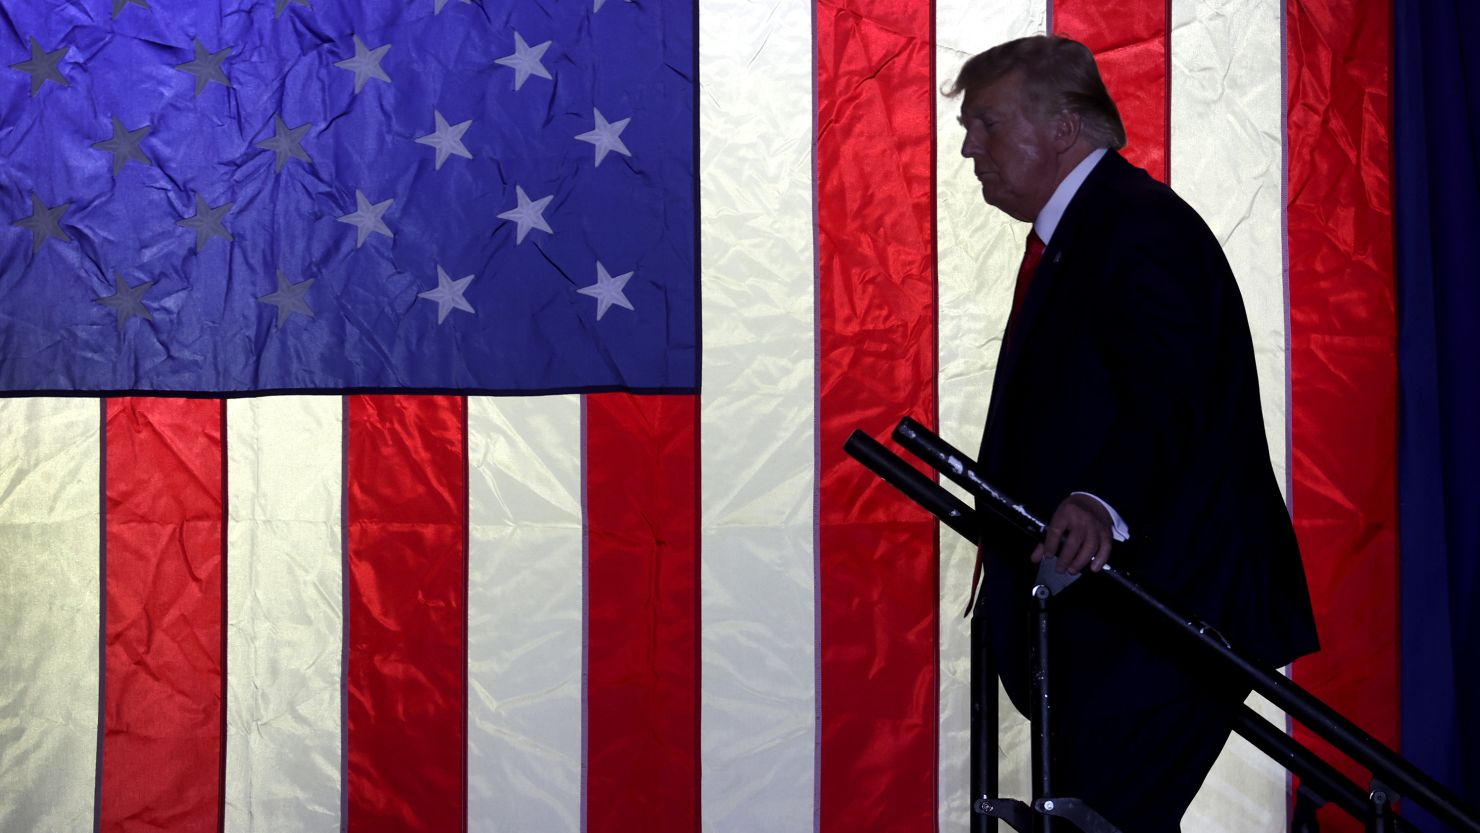 Former President Donald Trump arrives at a rally on April 02, 2022 near Washington, Michigan. Trump is in Michigan to promote his America First agenda and voice his support for several Michigan Republican candidates. (Photo by Scott Olson/Getty Images)